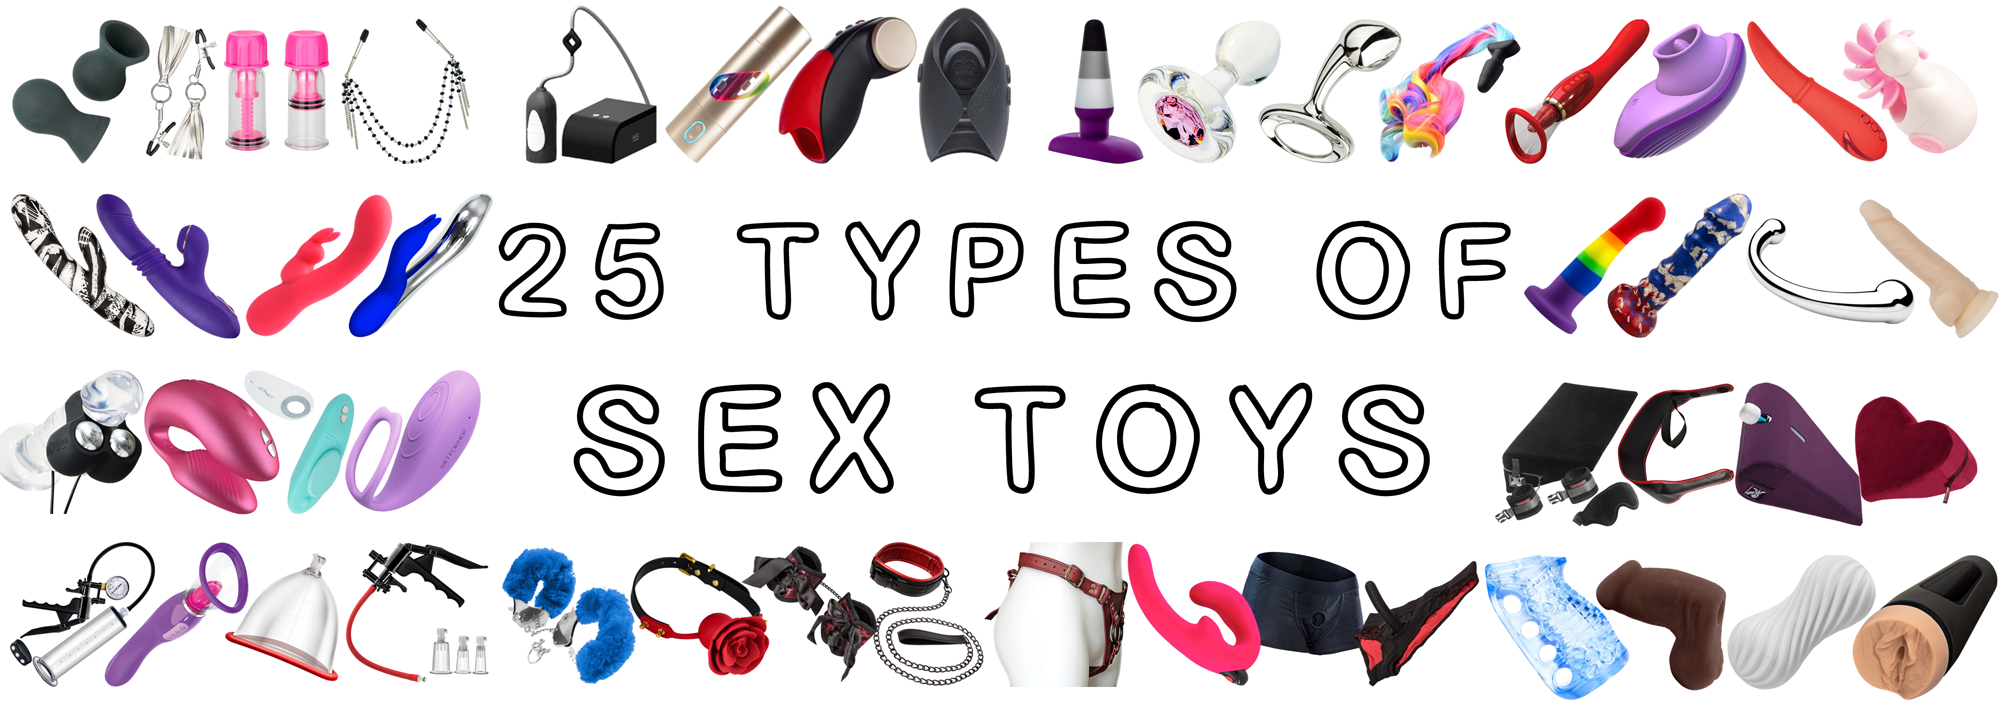 Subset Xxx Sexy Video - 25 Types of Sex Toys: A Guide to Help You Know What's Out There - Betty  Butch